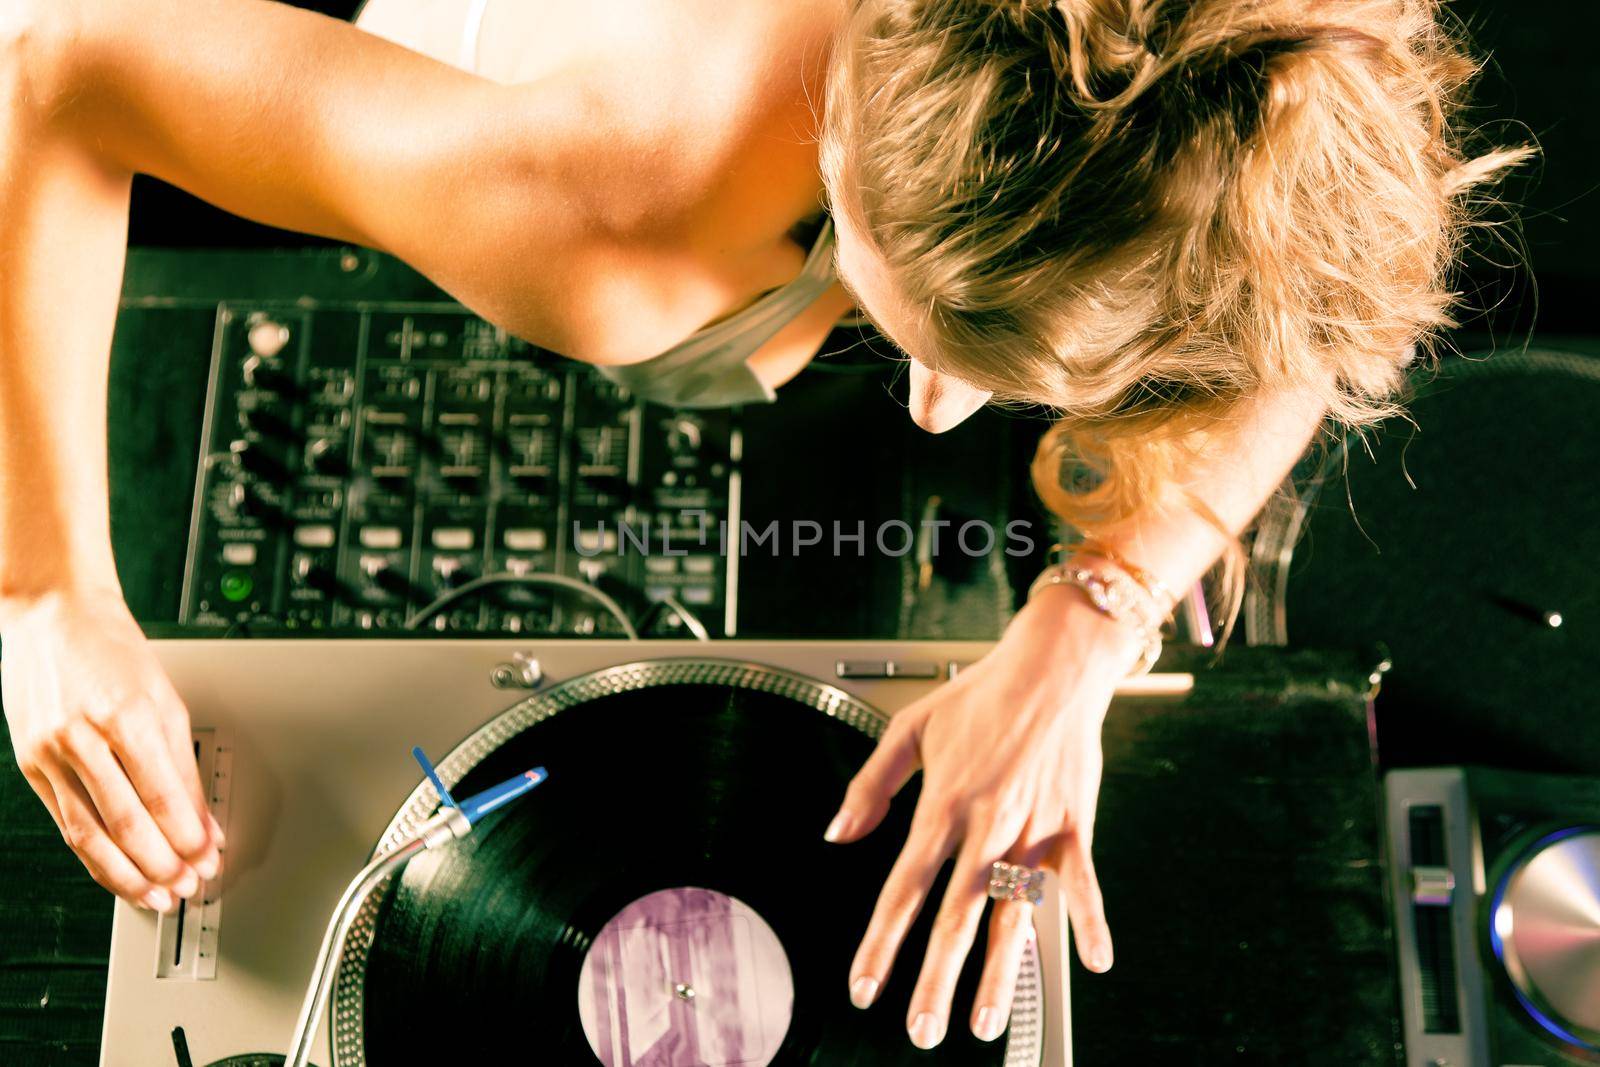 Female DJ at the turntable in Club by Kzenon